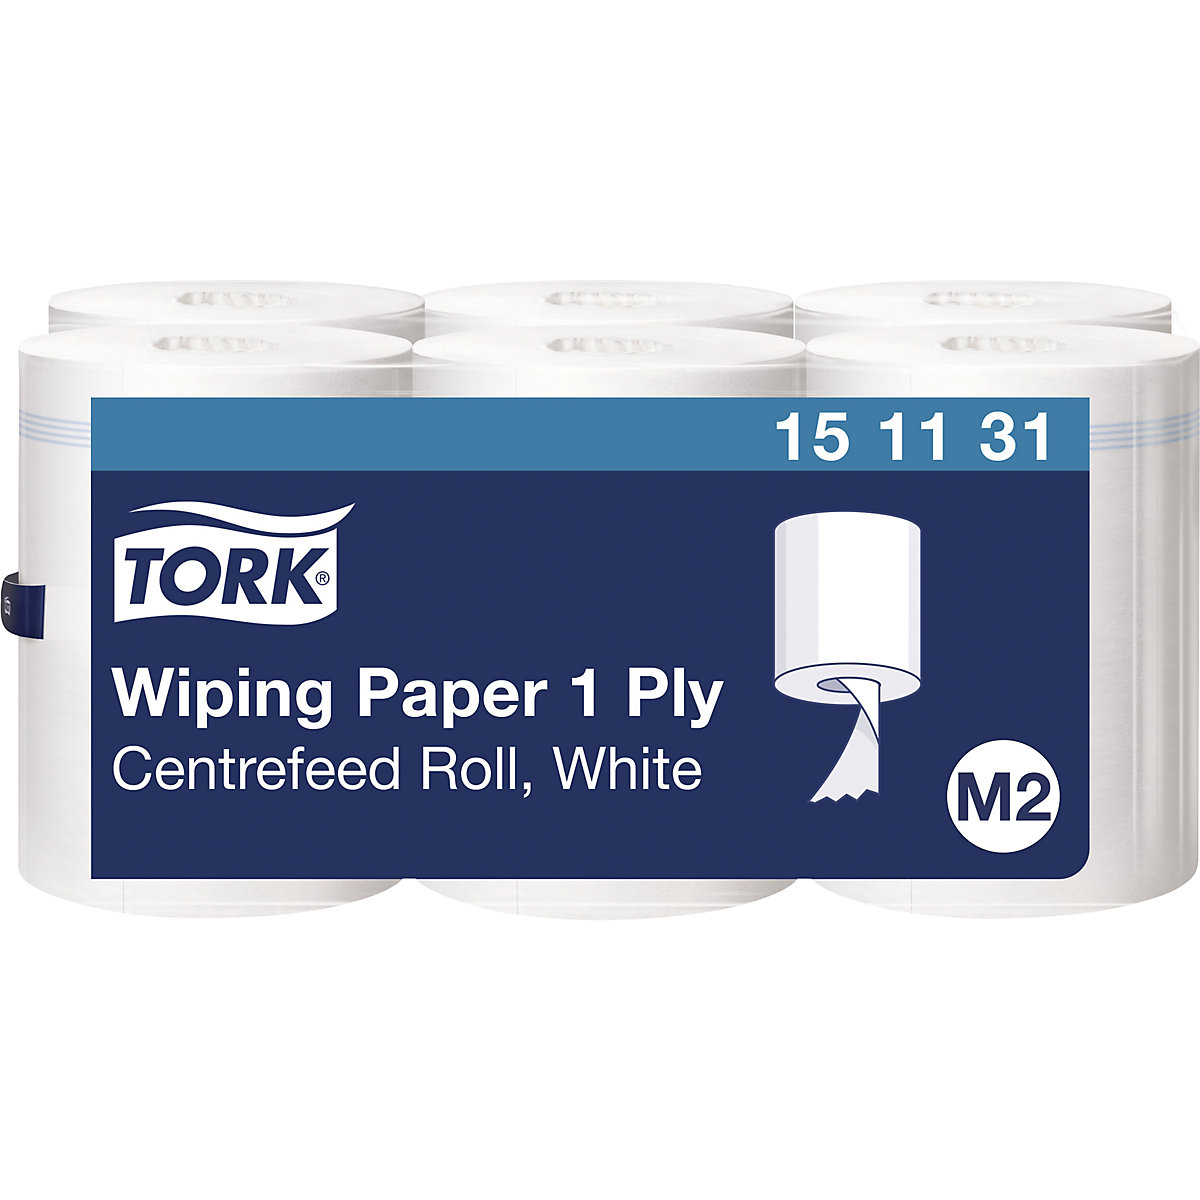 Centrefeed paper wipes - TORK